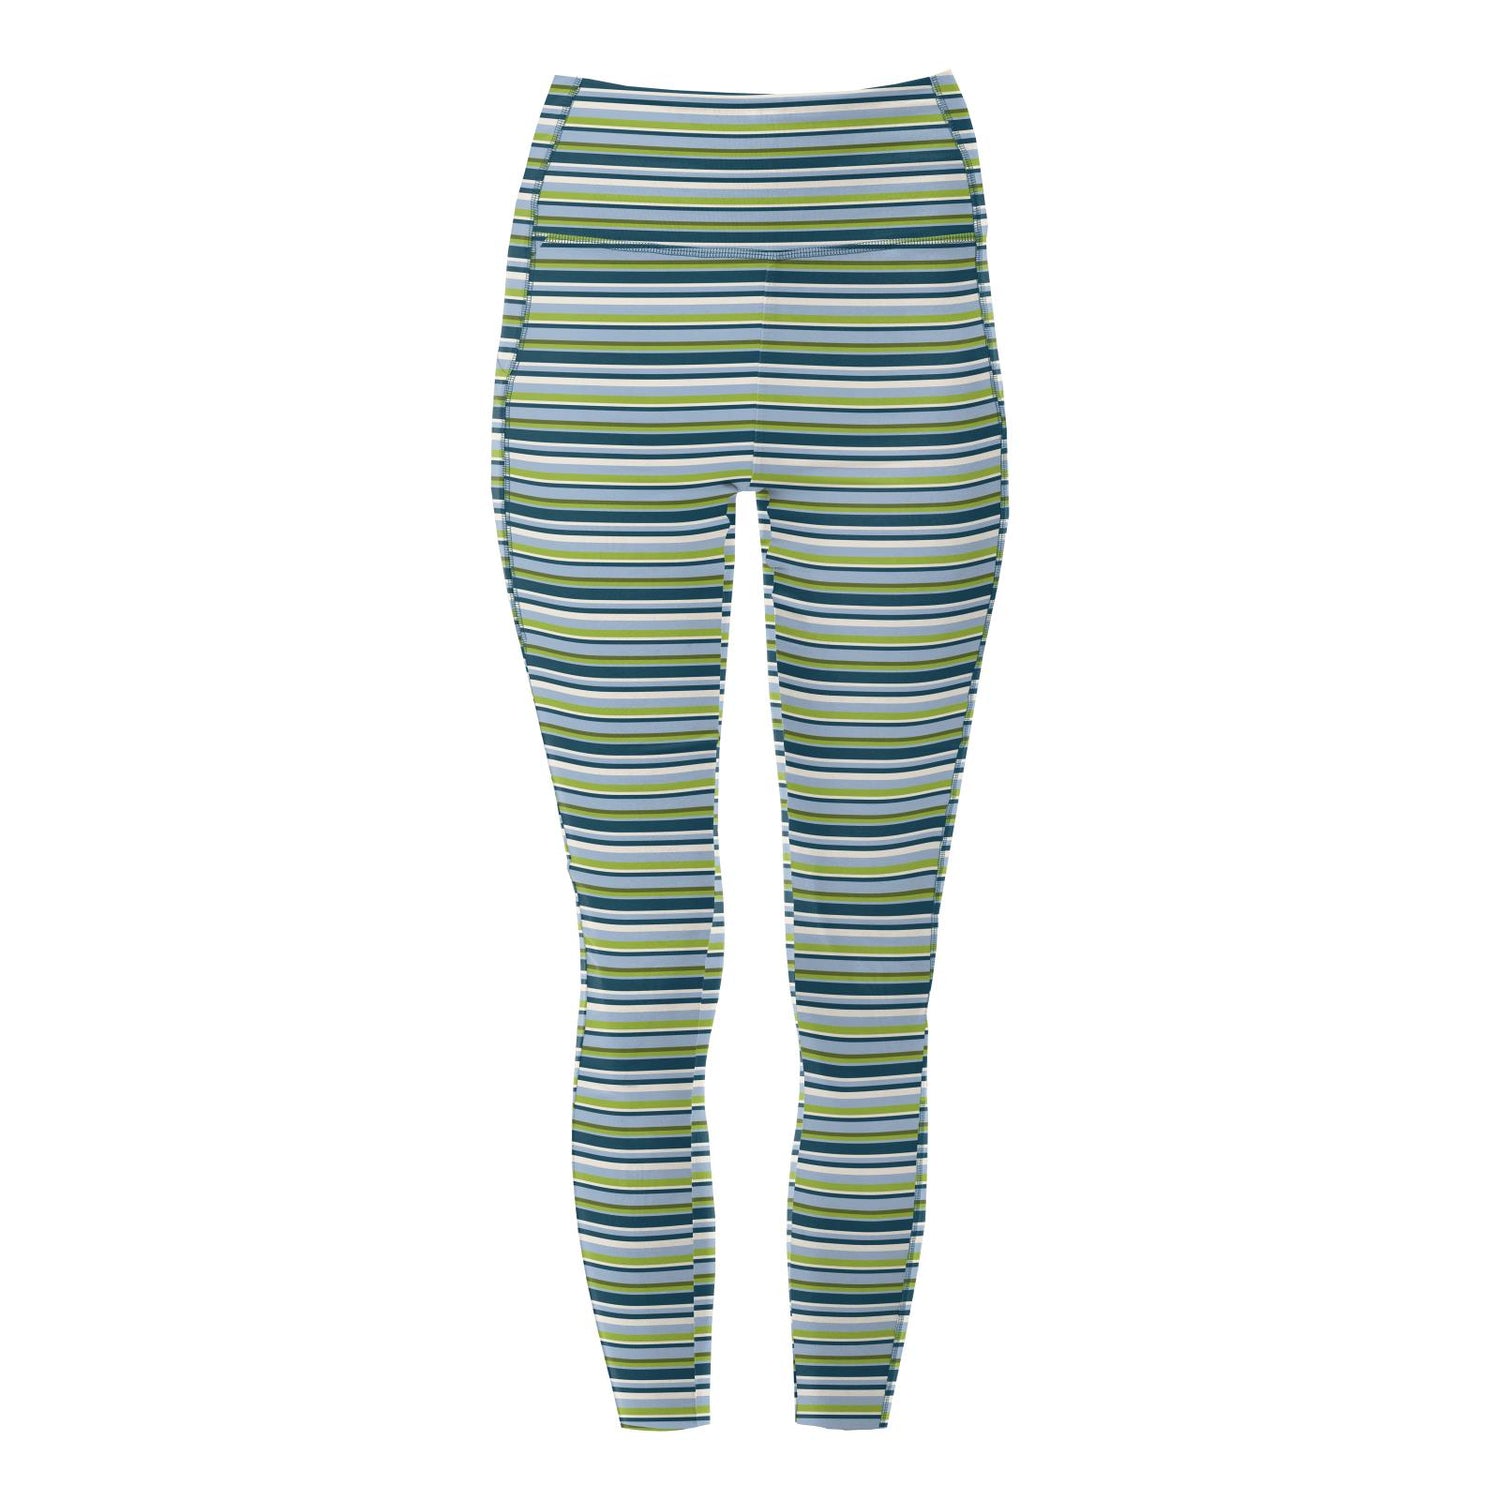 Women's Print Luxe Stretch 7/8 Leggings with Pockets in Anniversary Sailaway Stripe